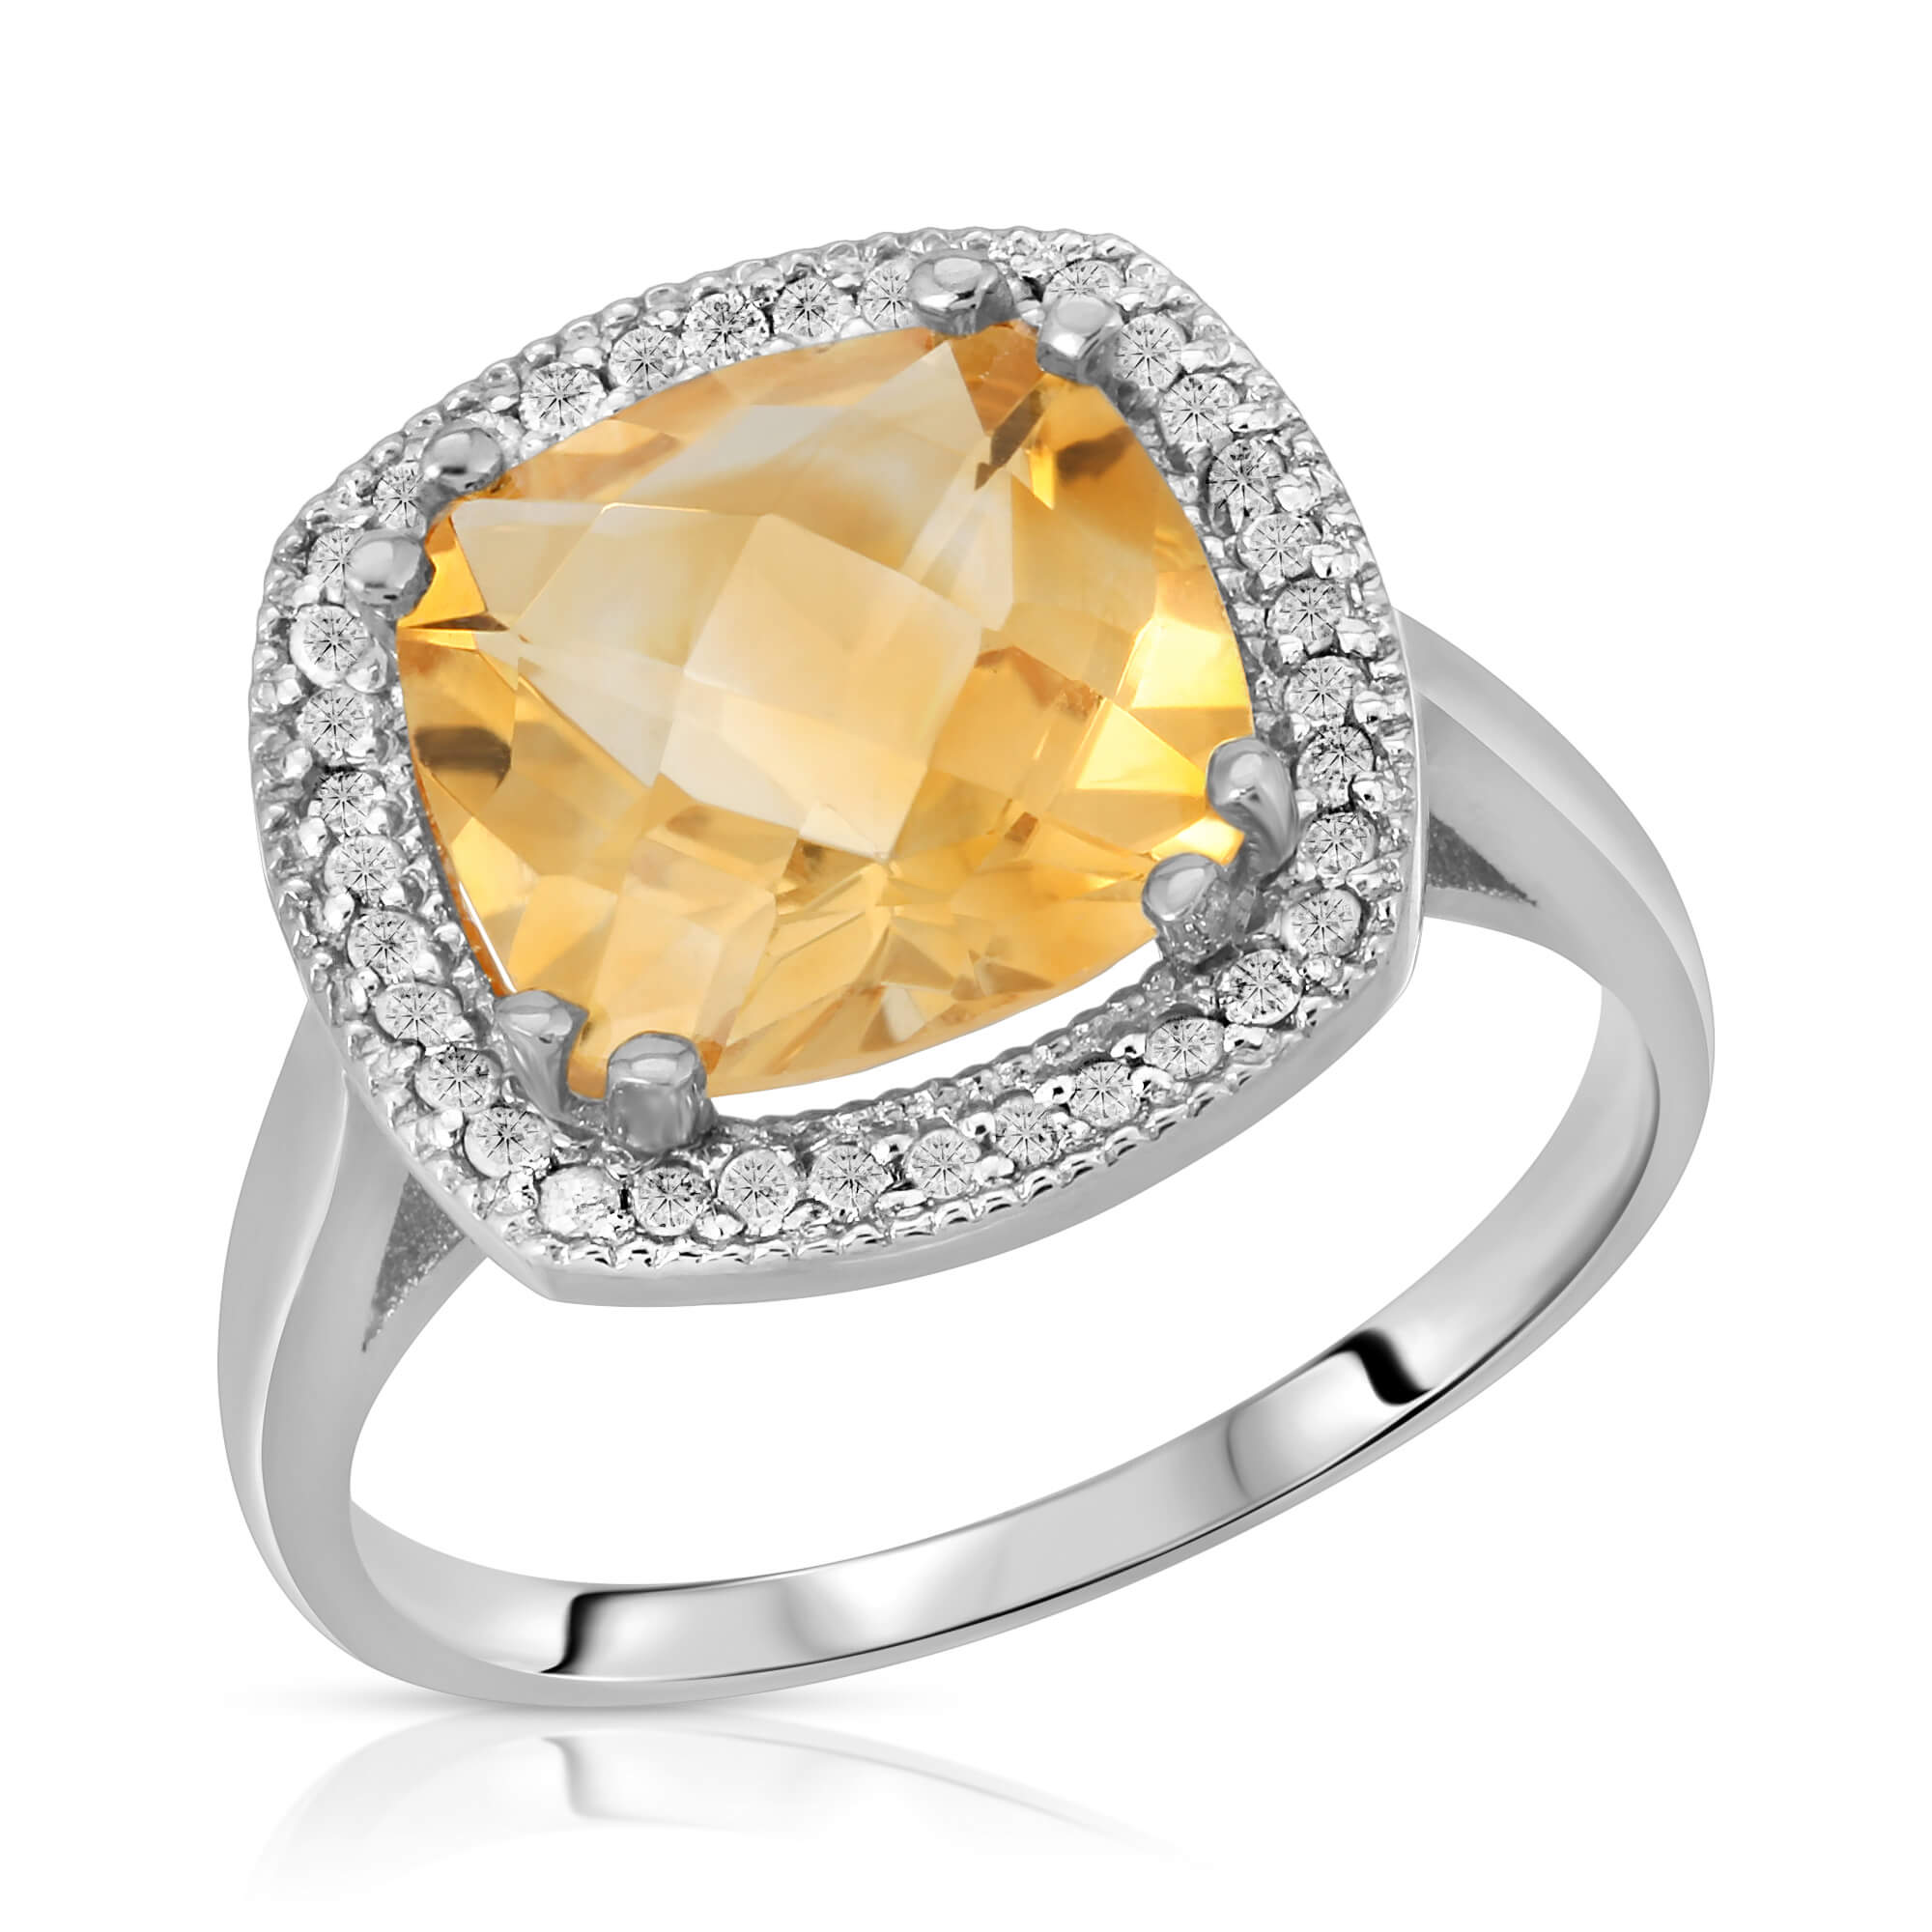 Cushion Cut Citrine Ring 3.8 ctw in Sterling Silver